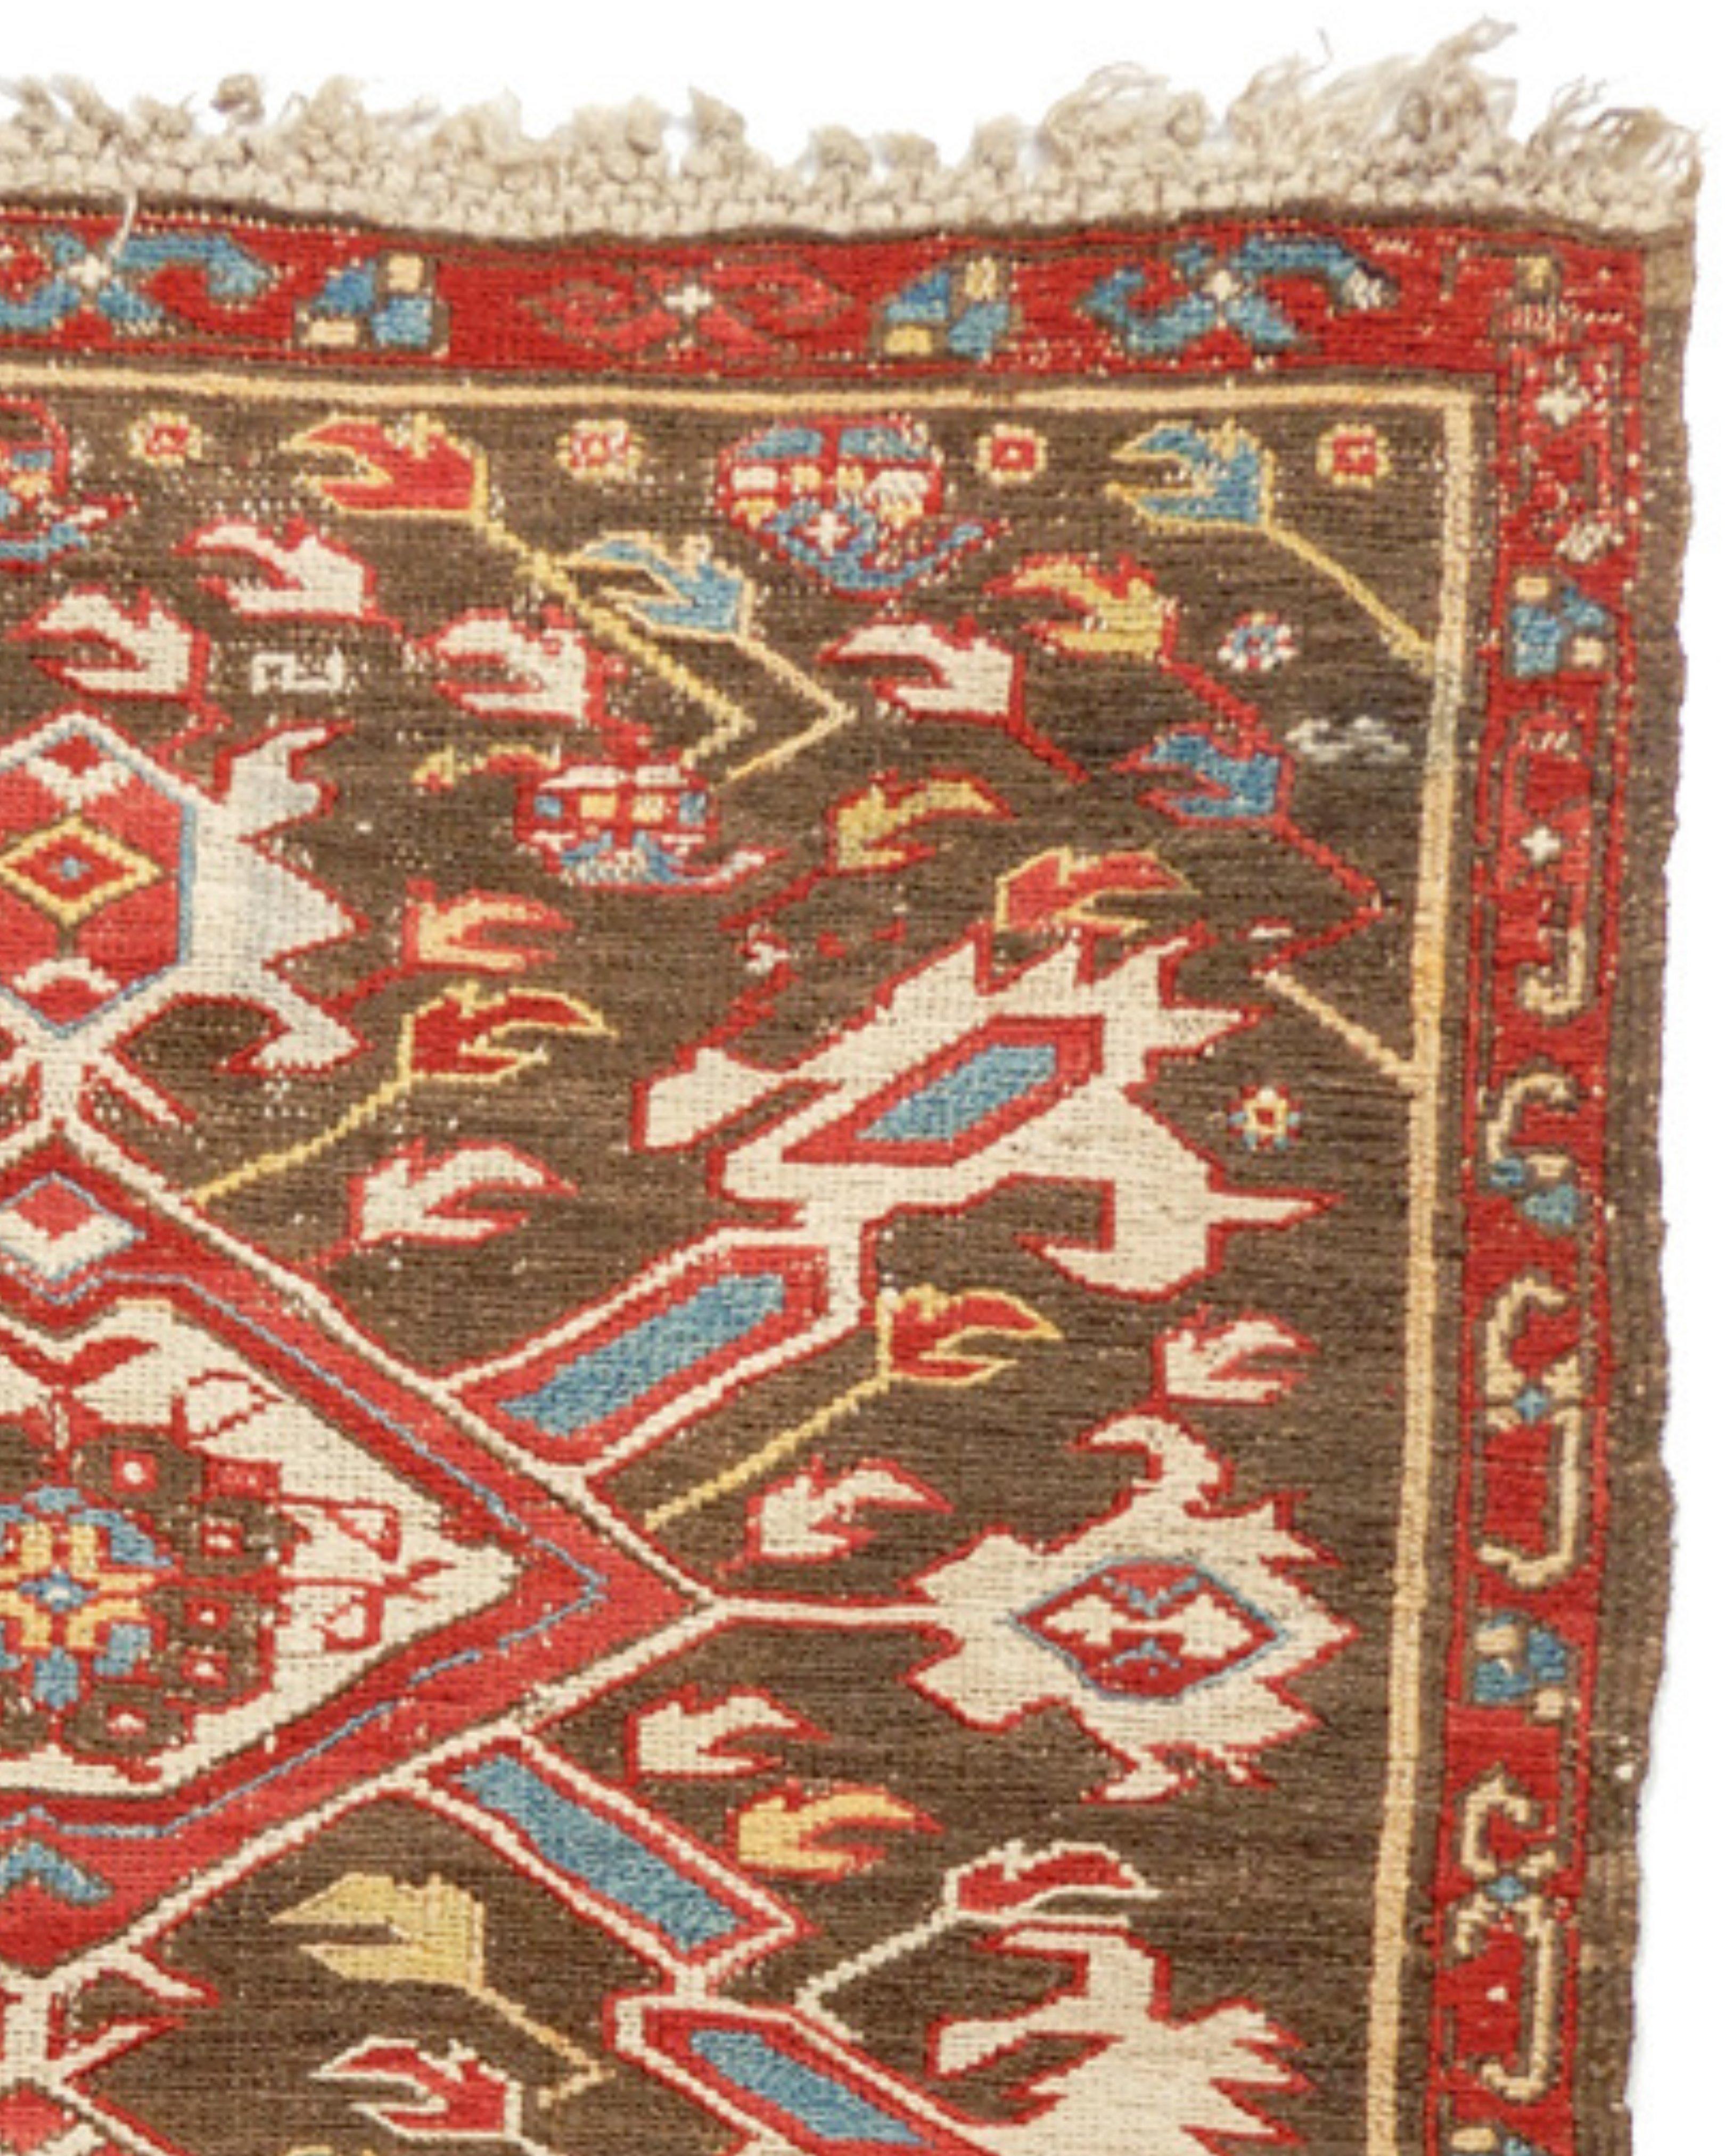 Seichour Sumak Rug, Late 19th Century

Additional Information:
Dimensions: 2'4